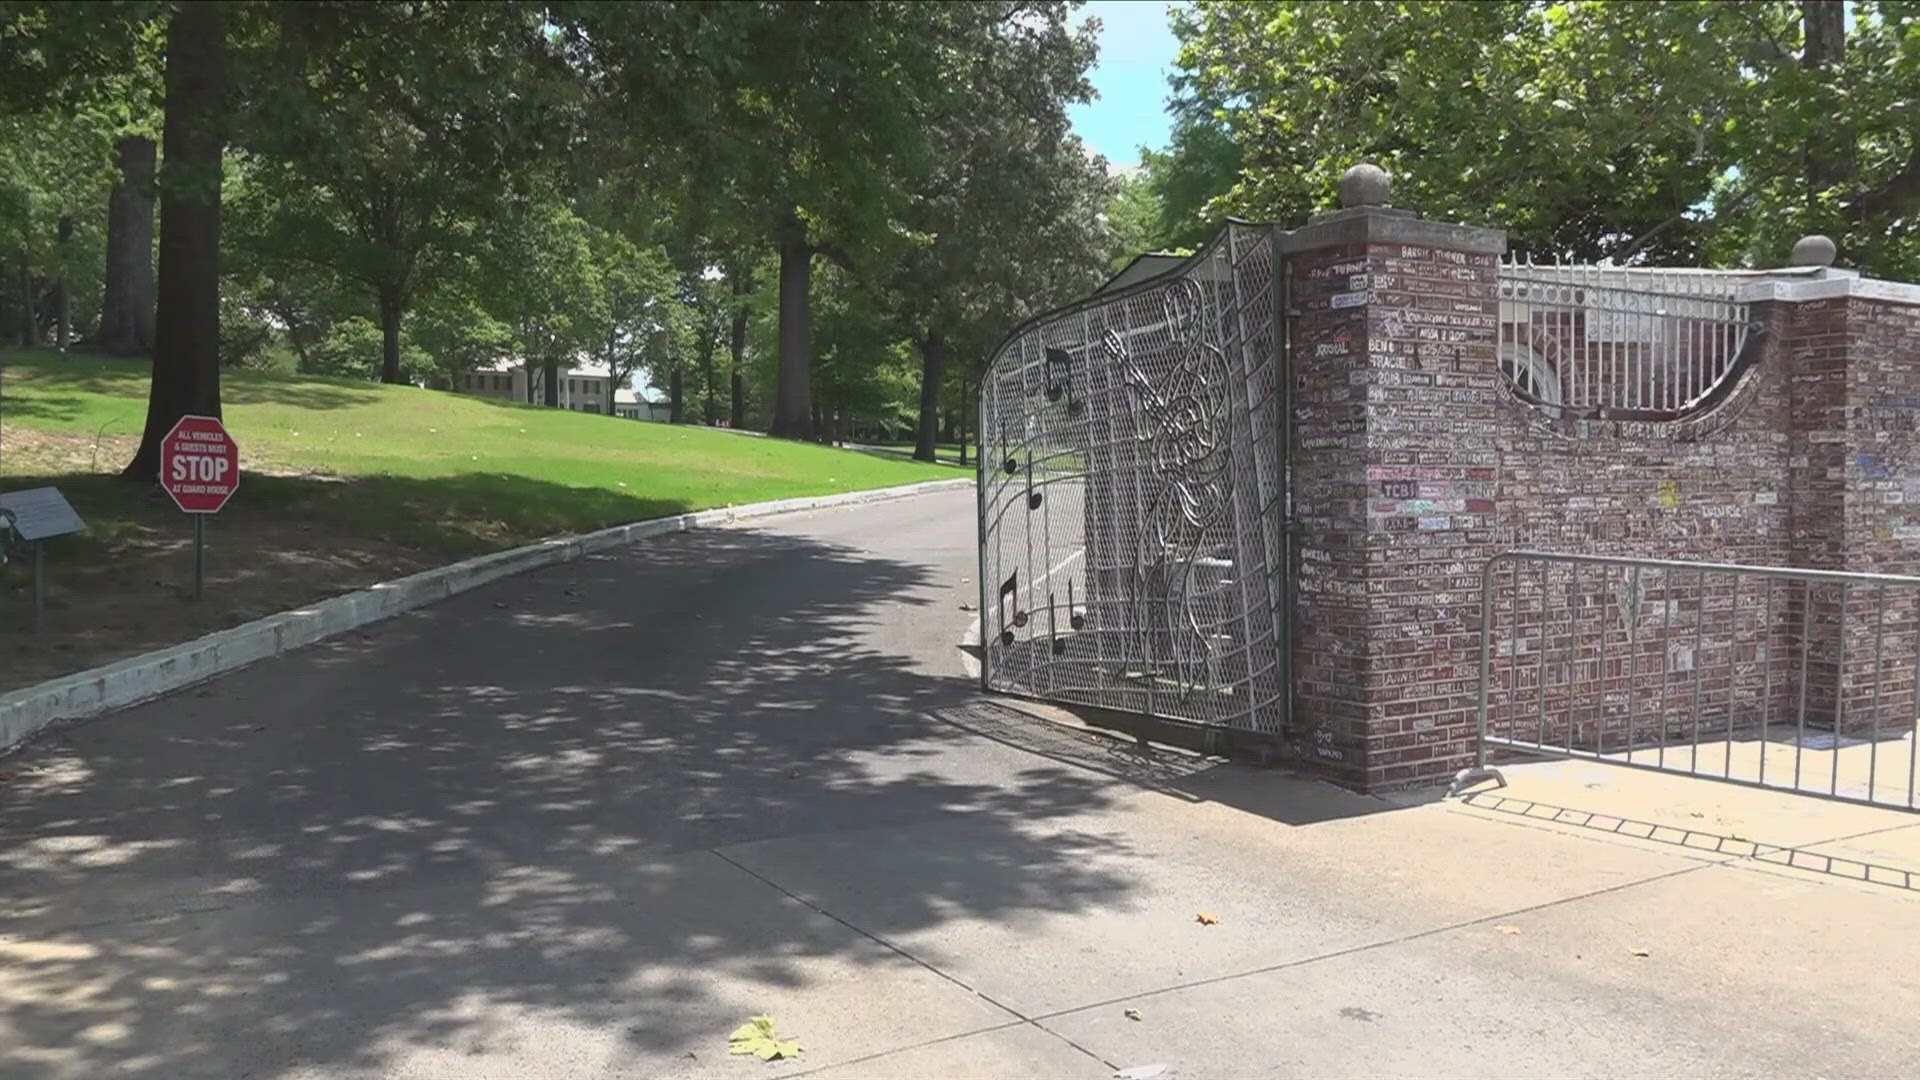 A judge blocked a company's attempt to sell Presley's former-home-turned museum in Memphis after his granddaughter filed a lawsuit claiming fraud.